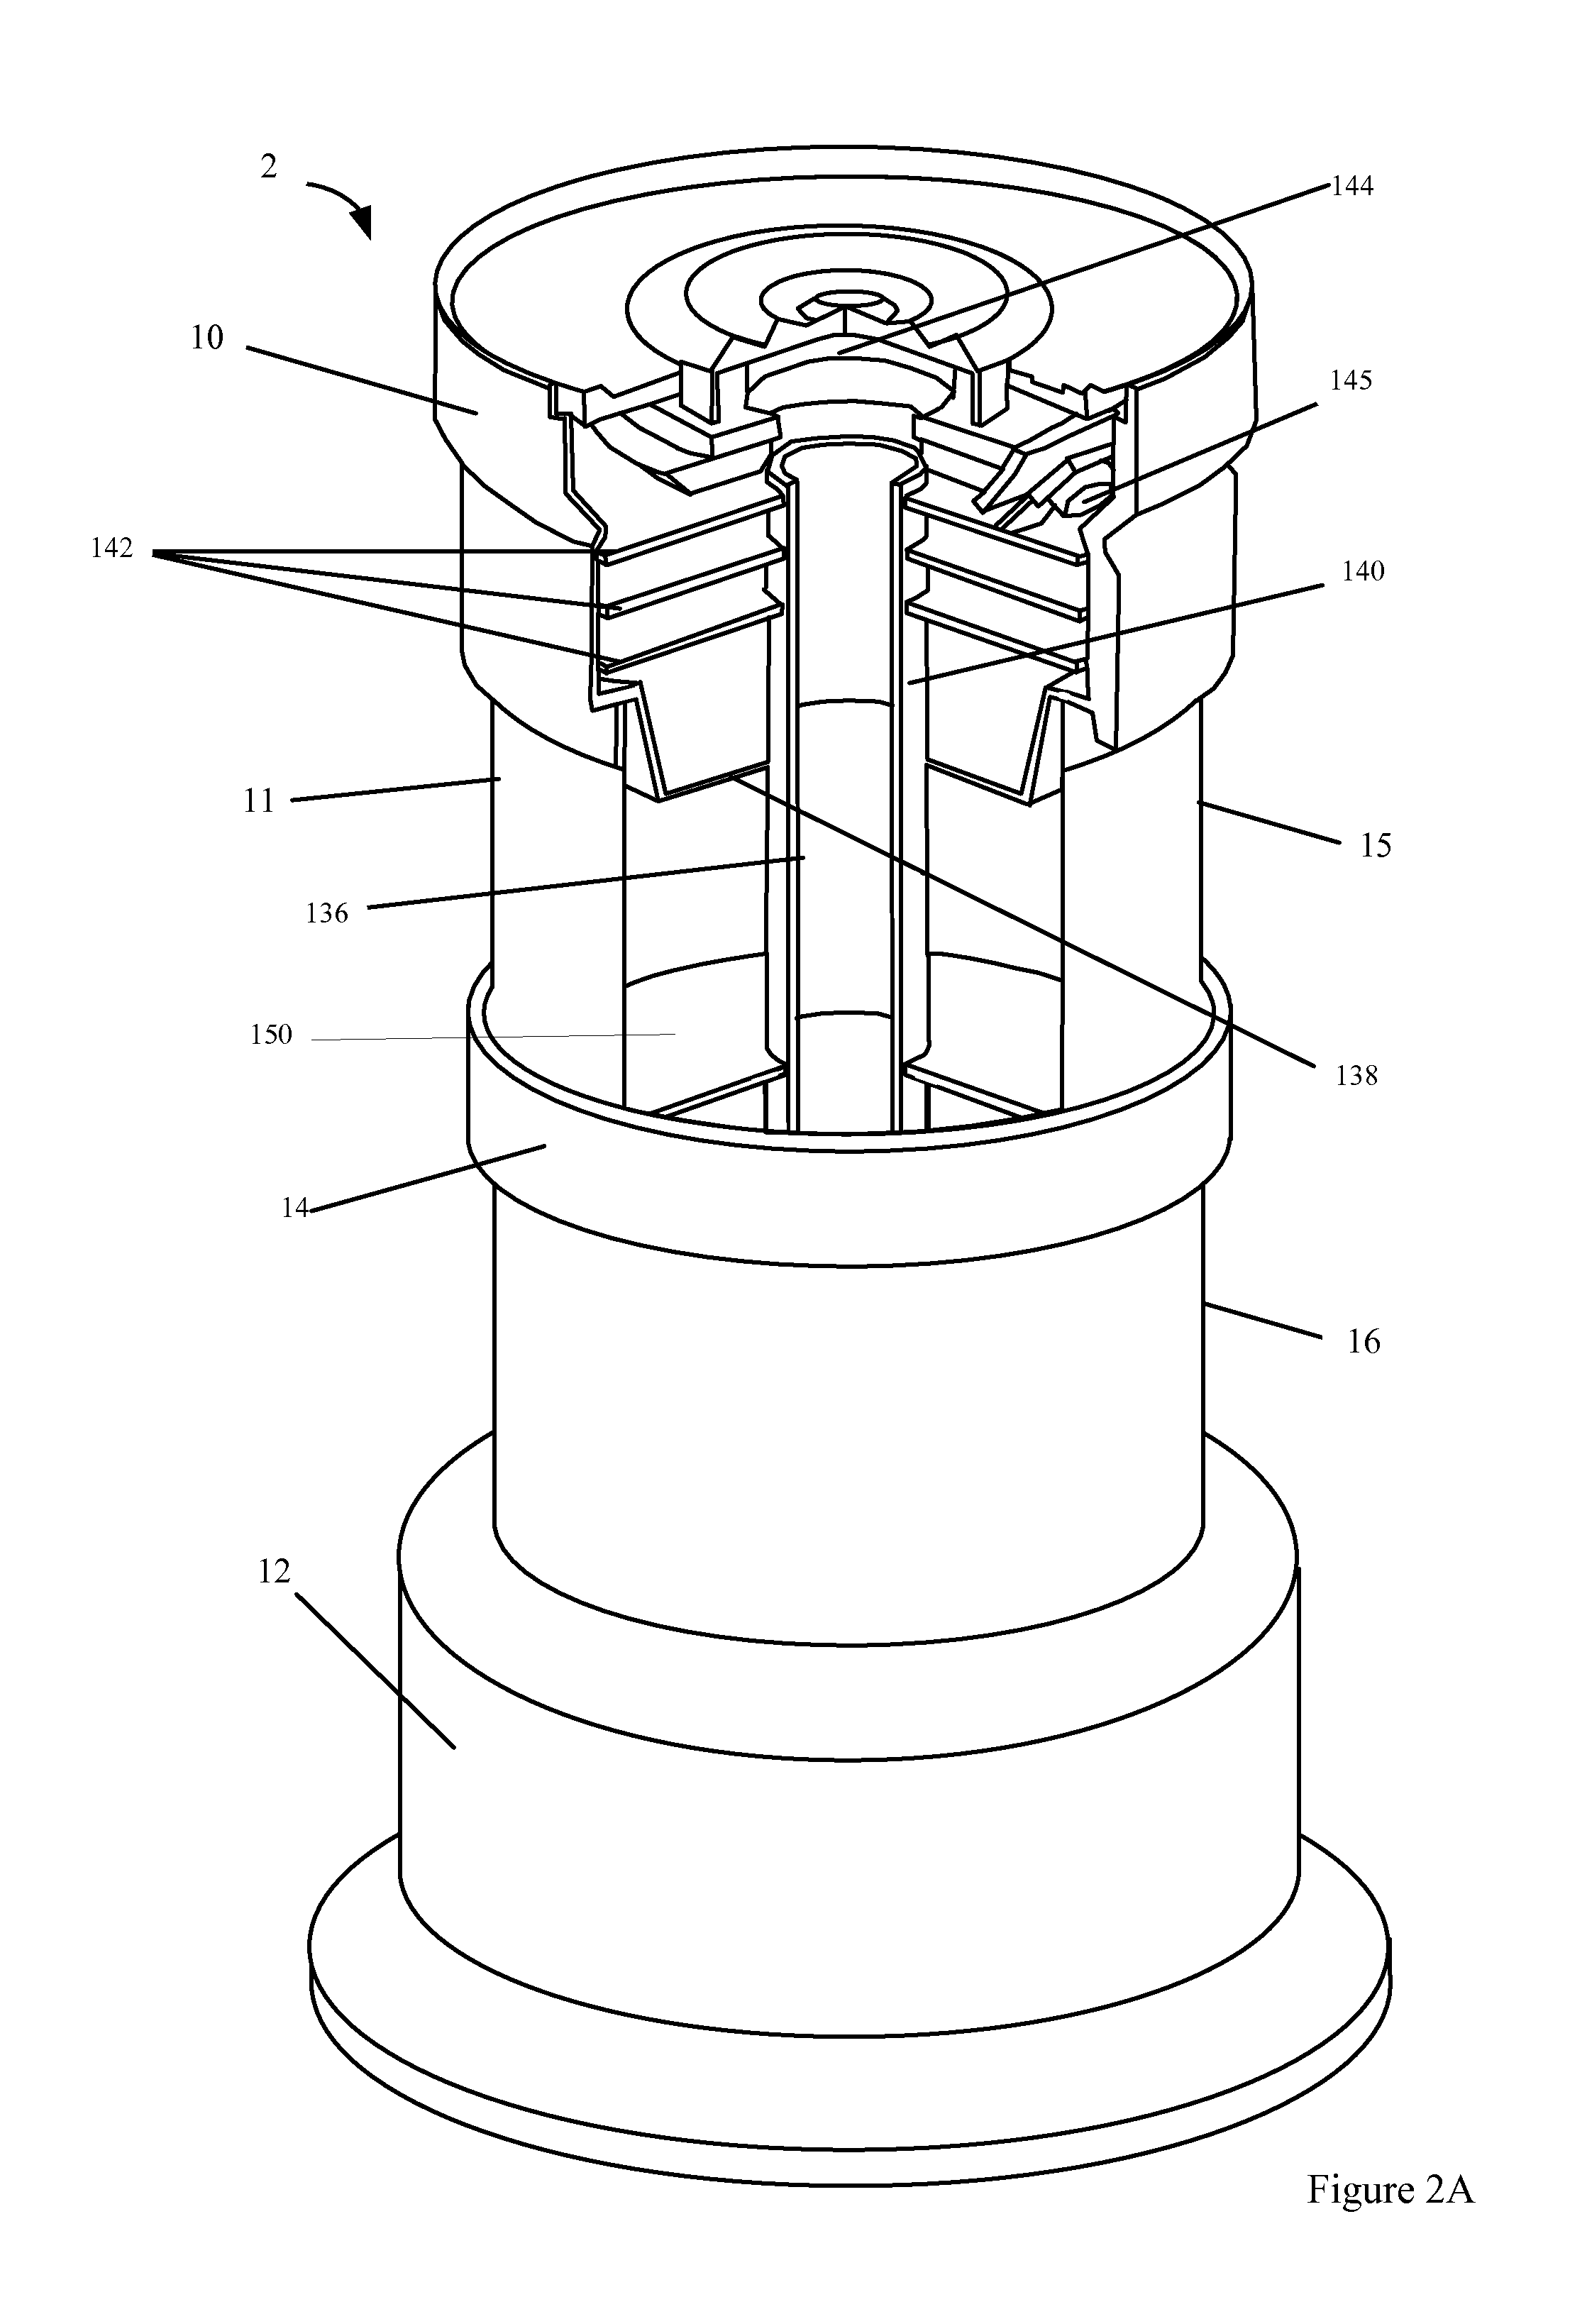 Candle device for providing transaction verification on a gaming machine